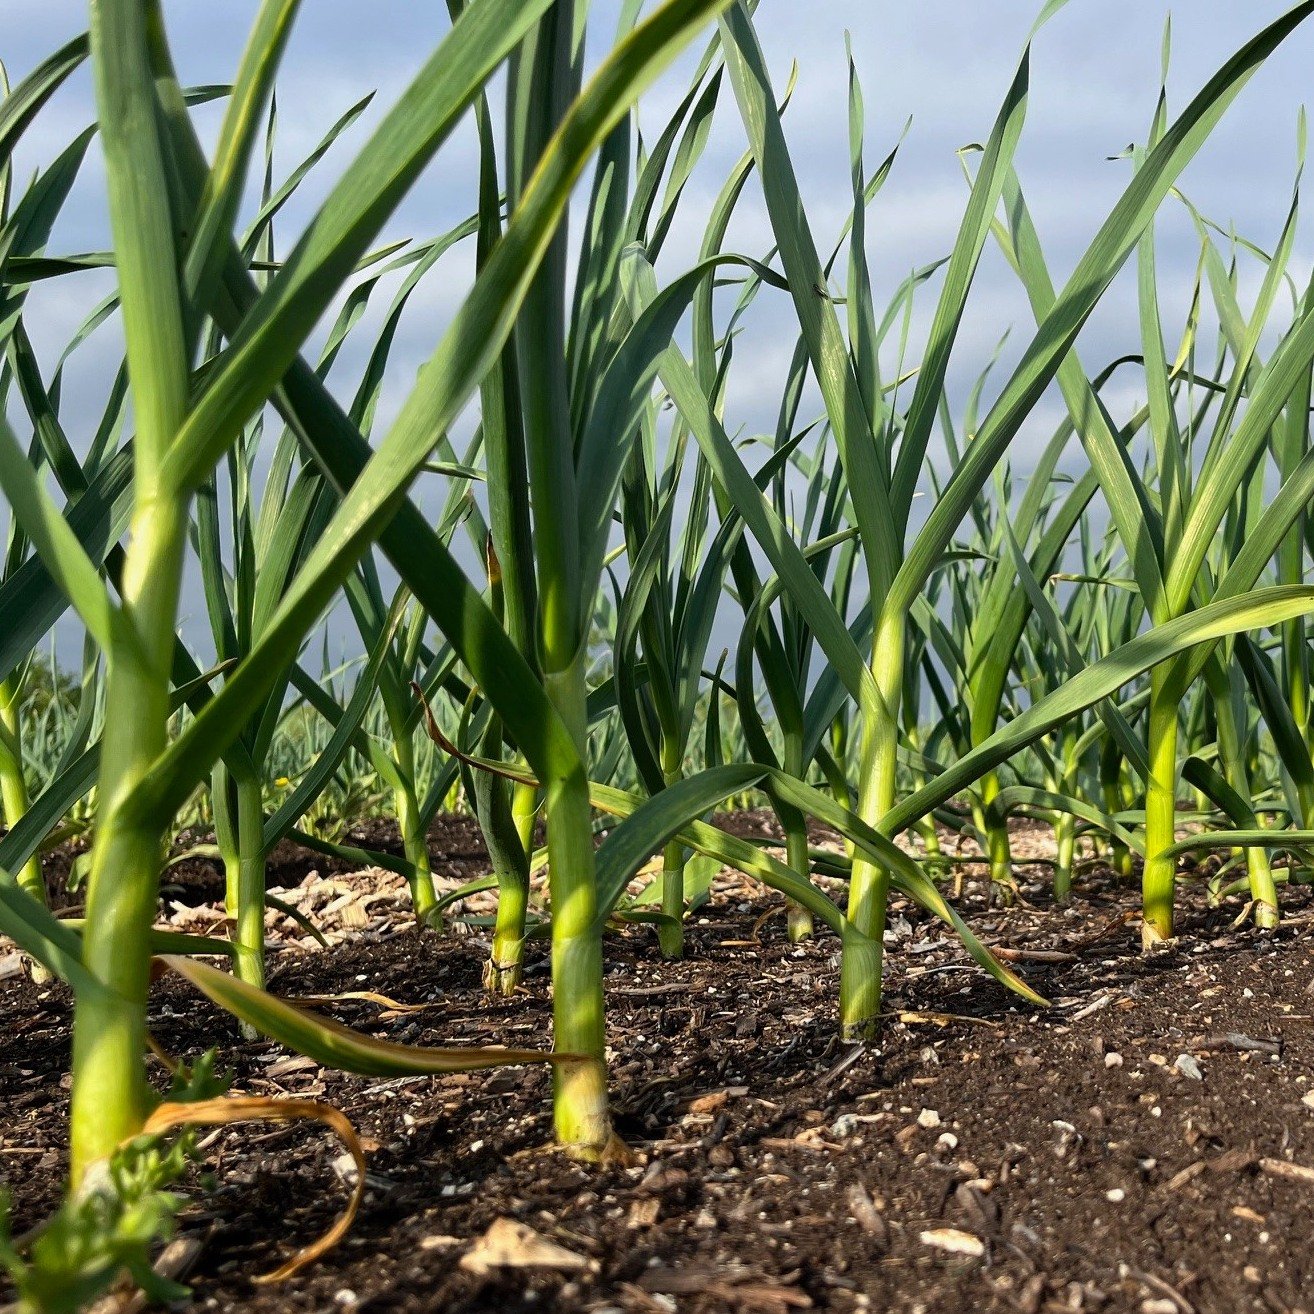 Introducing green garlic! This crop is new to us this year (or we have at least not grown it in a very long time) so we wanted to do a little research for both ourselves and our customers on what this crop is all about. So what is green garlic??

Gre